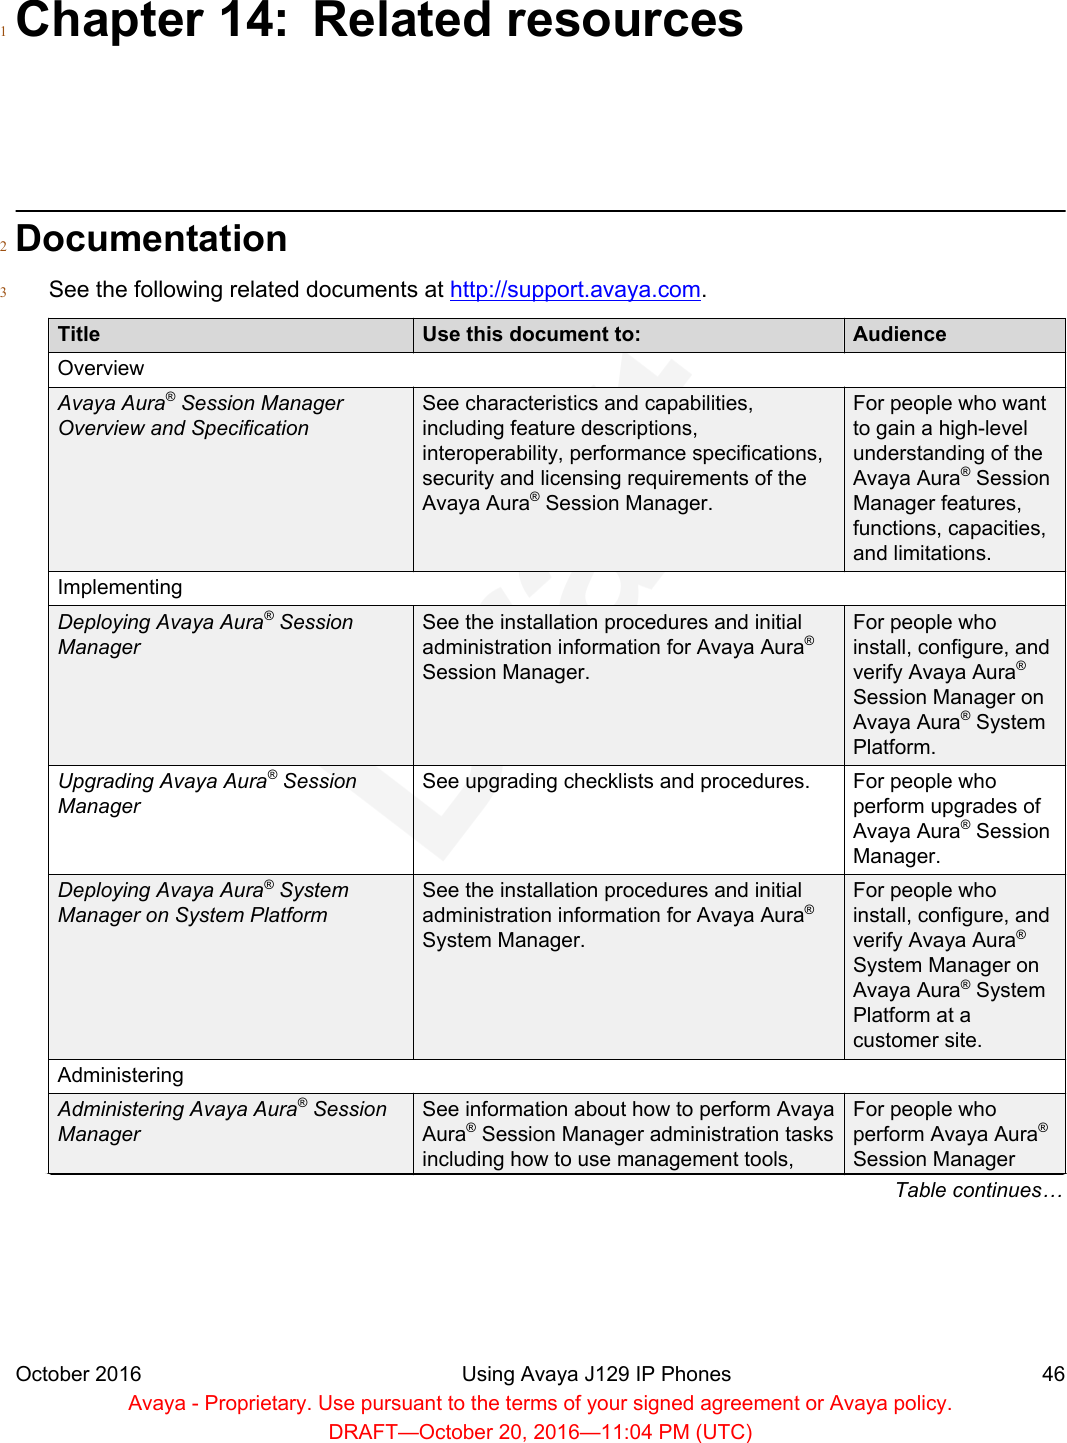 Chapter 14: Related resources1Documentation2See the following related documents at http://support.avaya.com.3Title Use this document to: AudienceOverviewAvaya Aura® Session ManagerOverview and SpecificationSee characteristics and capabilities,including feature descriptions,interoperability, performance specifications,security and licensing requirements of theAvaya Aura® Session Manager.For people who wantto gain a high-levelunderstanding of theAvaya Aura® SessionManager features,functions, capacities,and limitations.ImplementingDeploying Avaya Aura® SessionManagerSee the installation procedures and initialadministration information for Avaya Aura®Session Manager.For people whoinstall, configure, andverify Avaya Aura®Session Manager onAvaya Aura® SystemPlatform.Upgrading Avaya Aura® SessionManagerSee upgrading checklists and procedures. For people whoperform upgrades ofAvaya Aura® SessionManager.Deploying Avaya Aura® SystemManager on System PlatformSee the installation procedures and initialadministration information for Avaya Aura®System Manager.For people whoinstall, configure, andverify Avaya Aura®System Manager onAvaya Aura® SystemPlatform at acustomer site.AdministeringAdministering Avaya Aura® SessionManagerSee information about how to perform AvayaAura® Session Manager administration tasksincluding how to use management tools,For people whoperform Avaya Aura®Session ManagerTable continues…October 2016 Using Avaya J129 IP Phones 46Avaya - Proprietary. Use pursuant to the terms of your signed agreement or Avaya policy.DRAFT—October 20, 2016—11:04 PM (UTC)